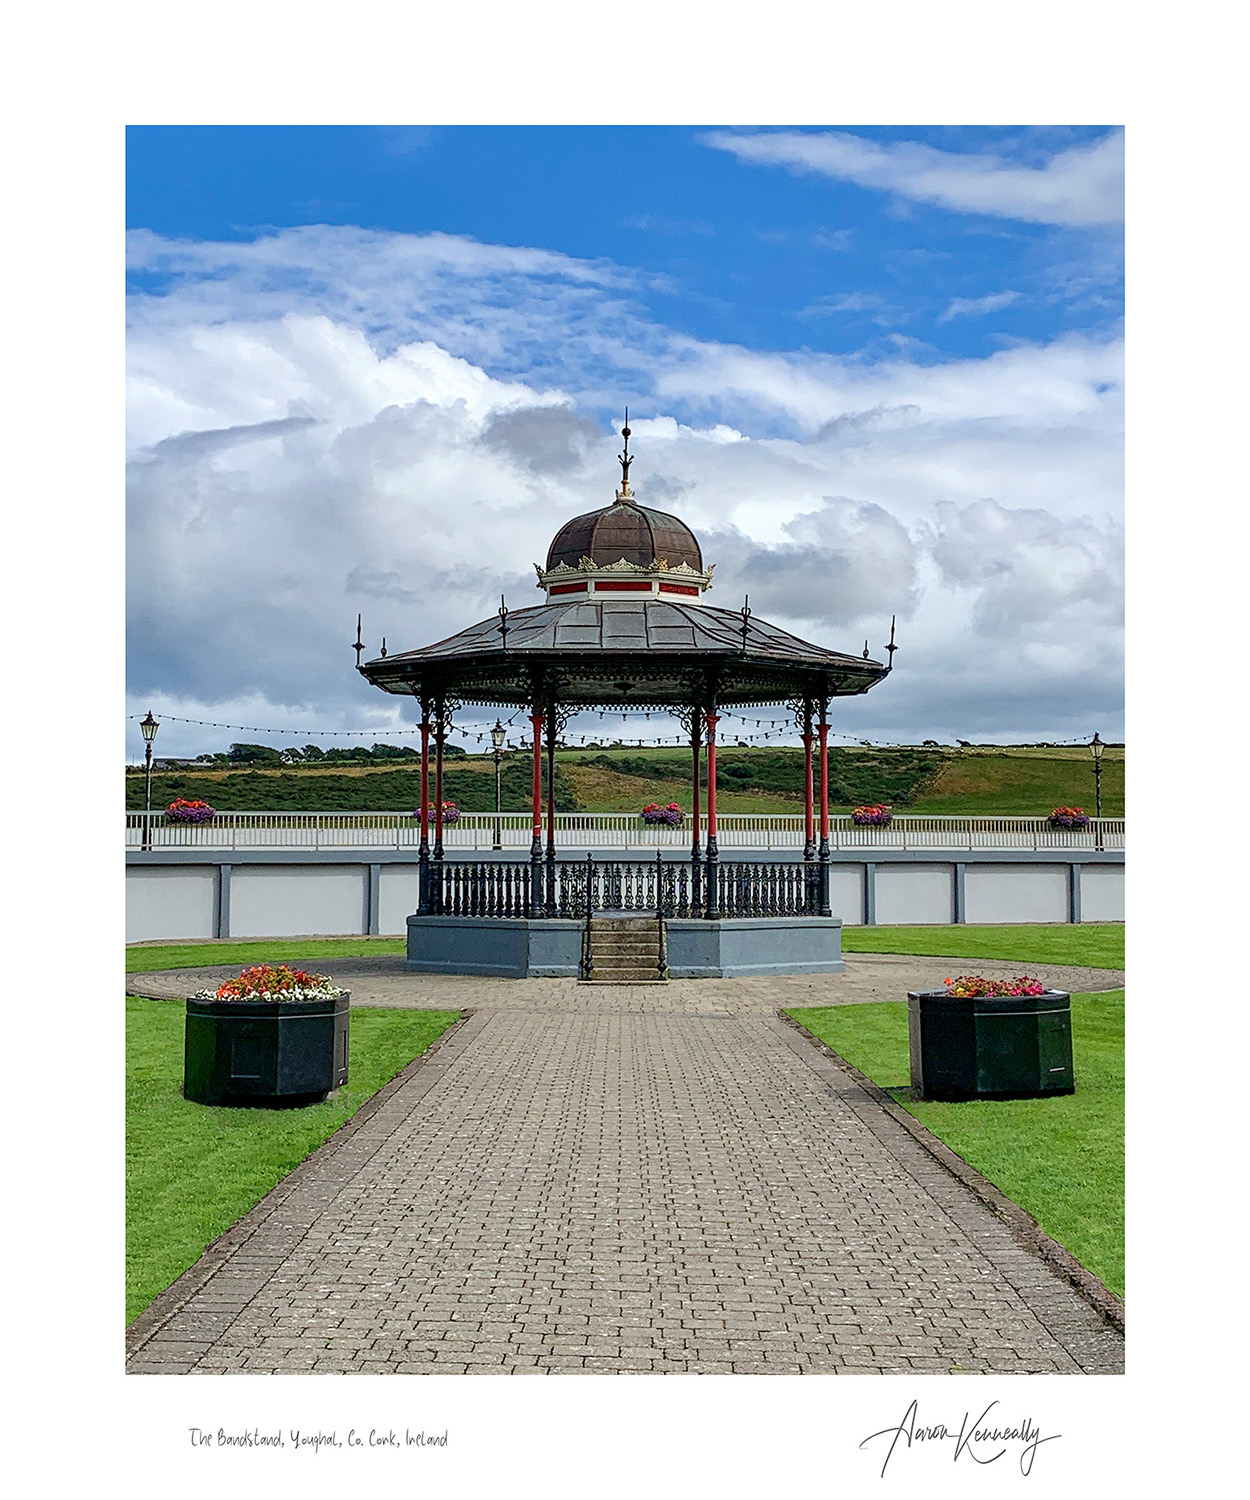 The Bandstand, Youghal, Co. Cork